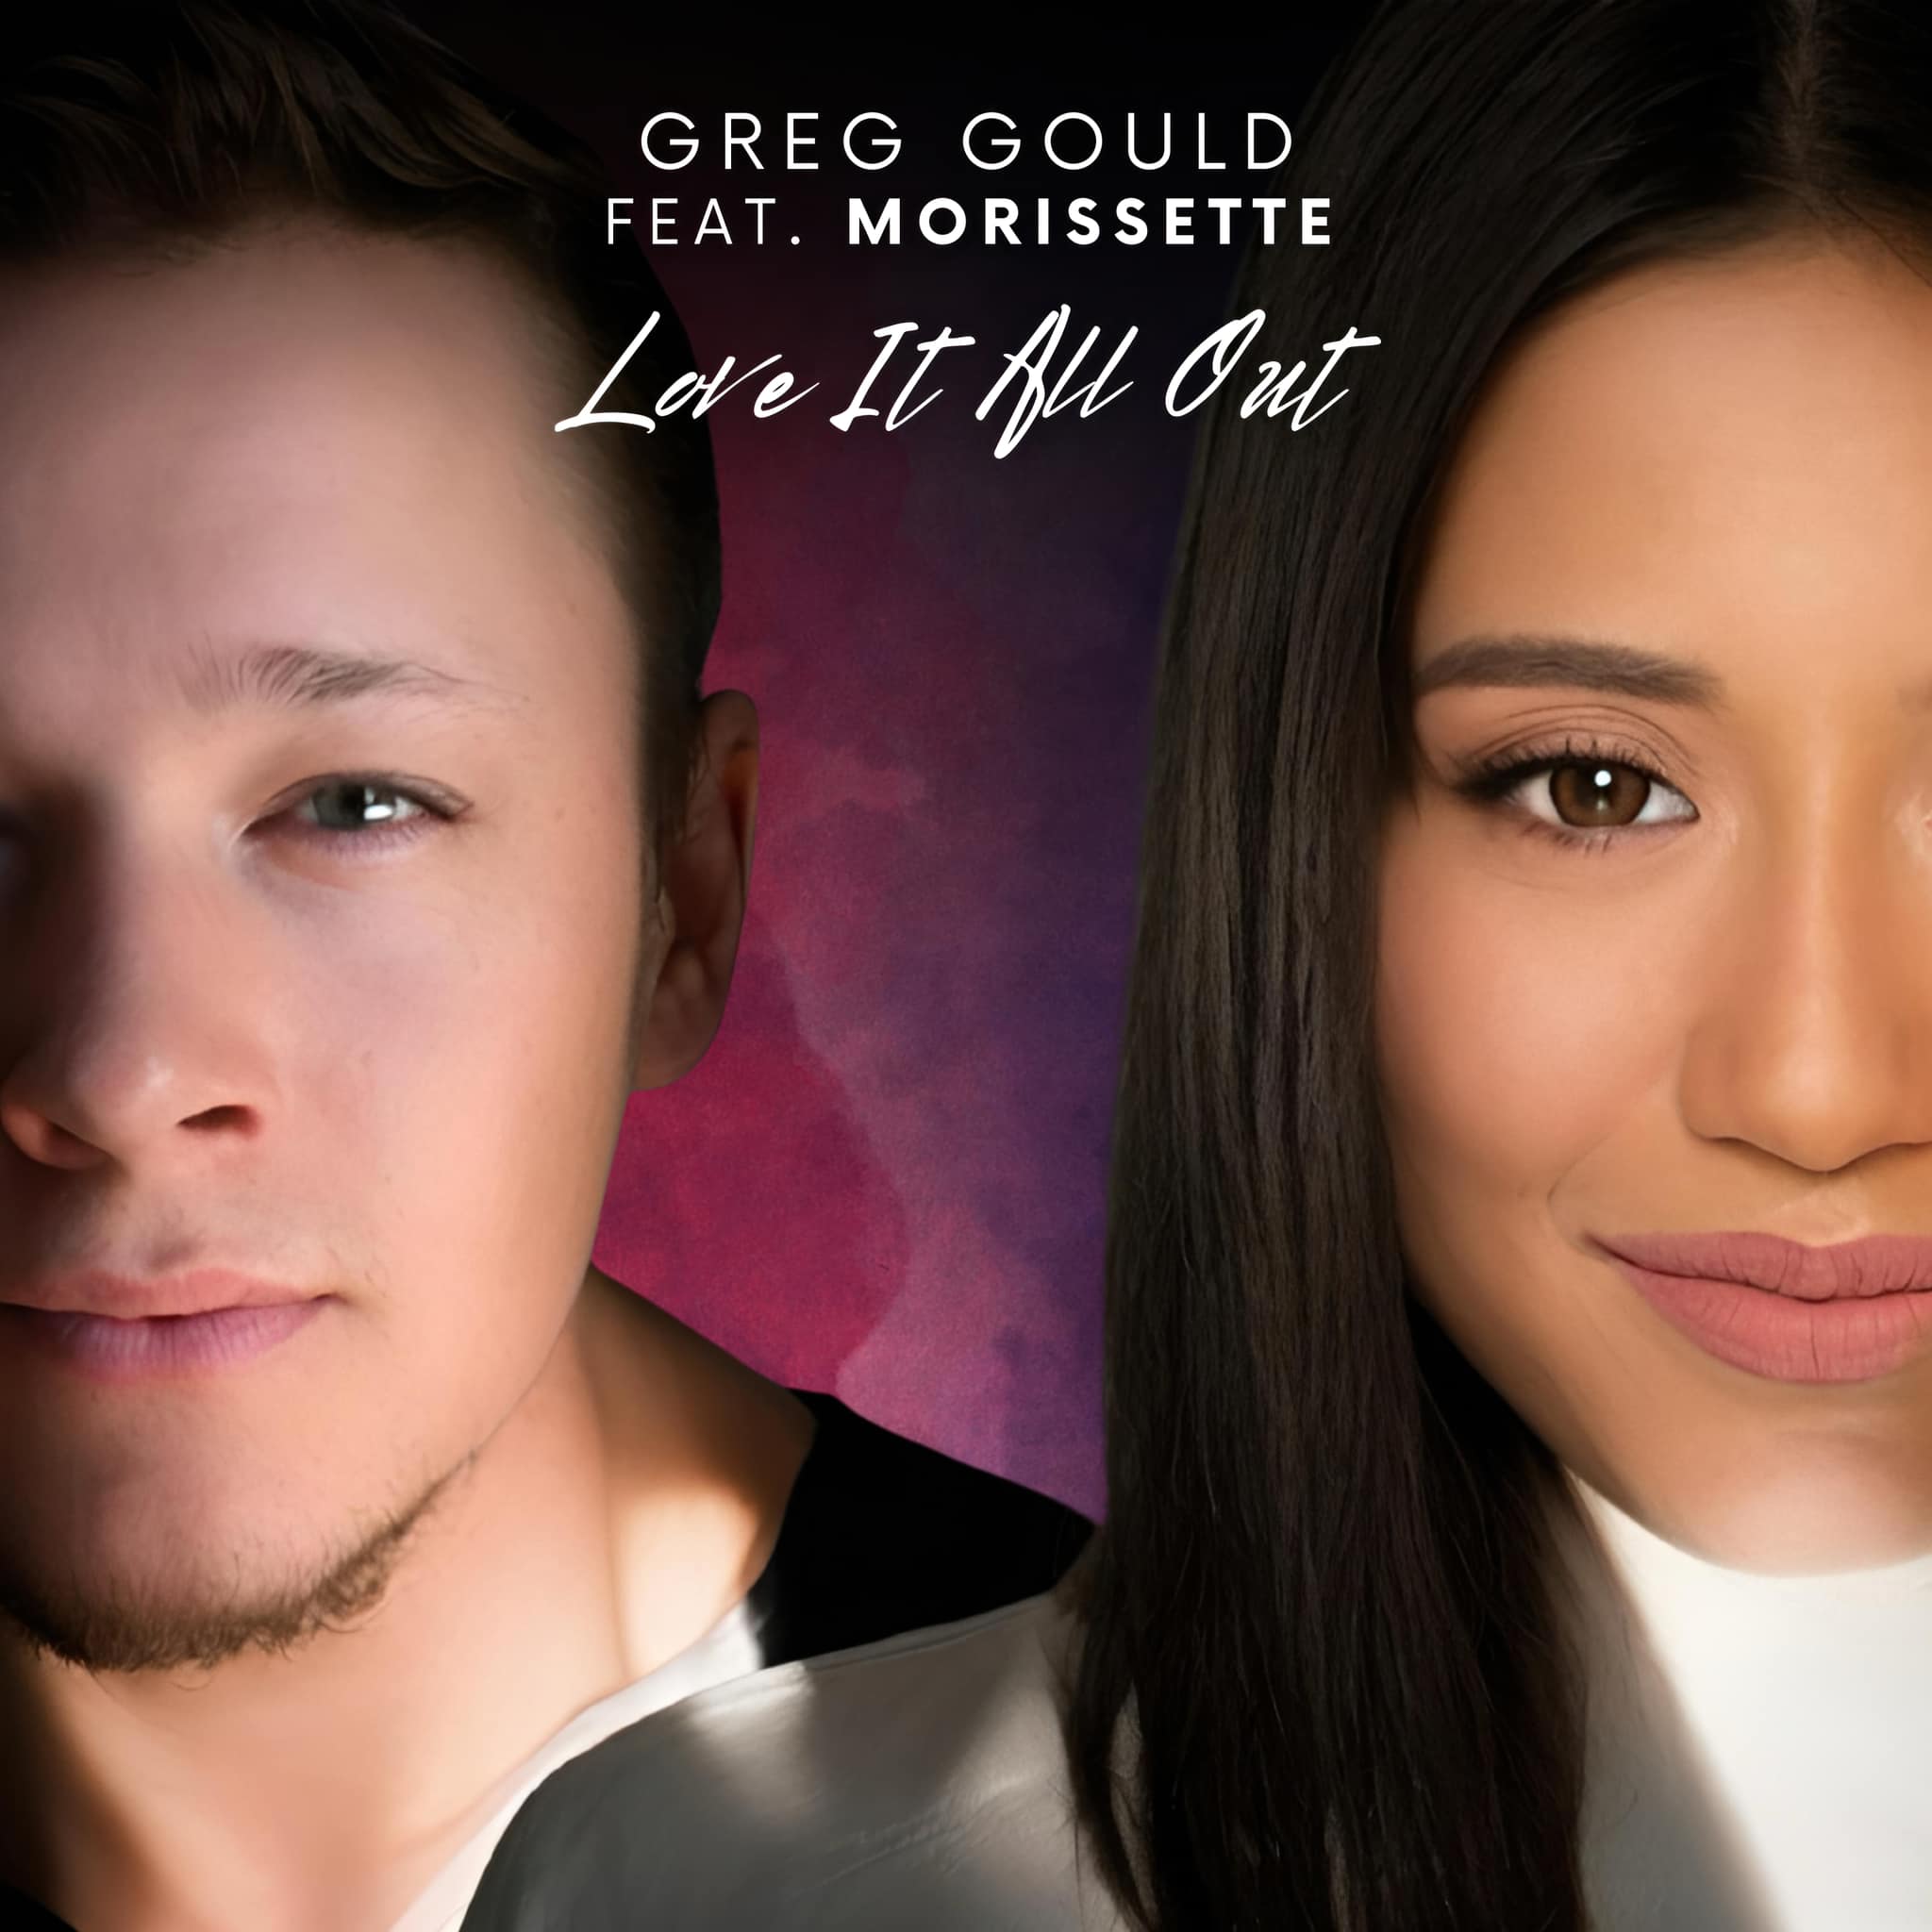 Greg recently recorded with Filipino singer Morissette